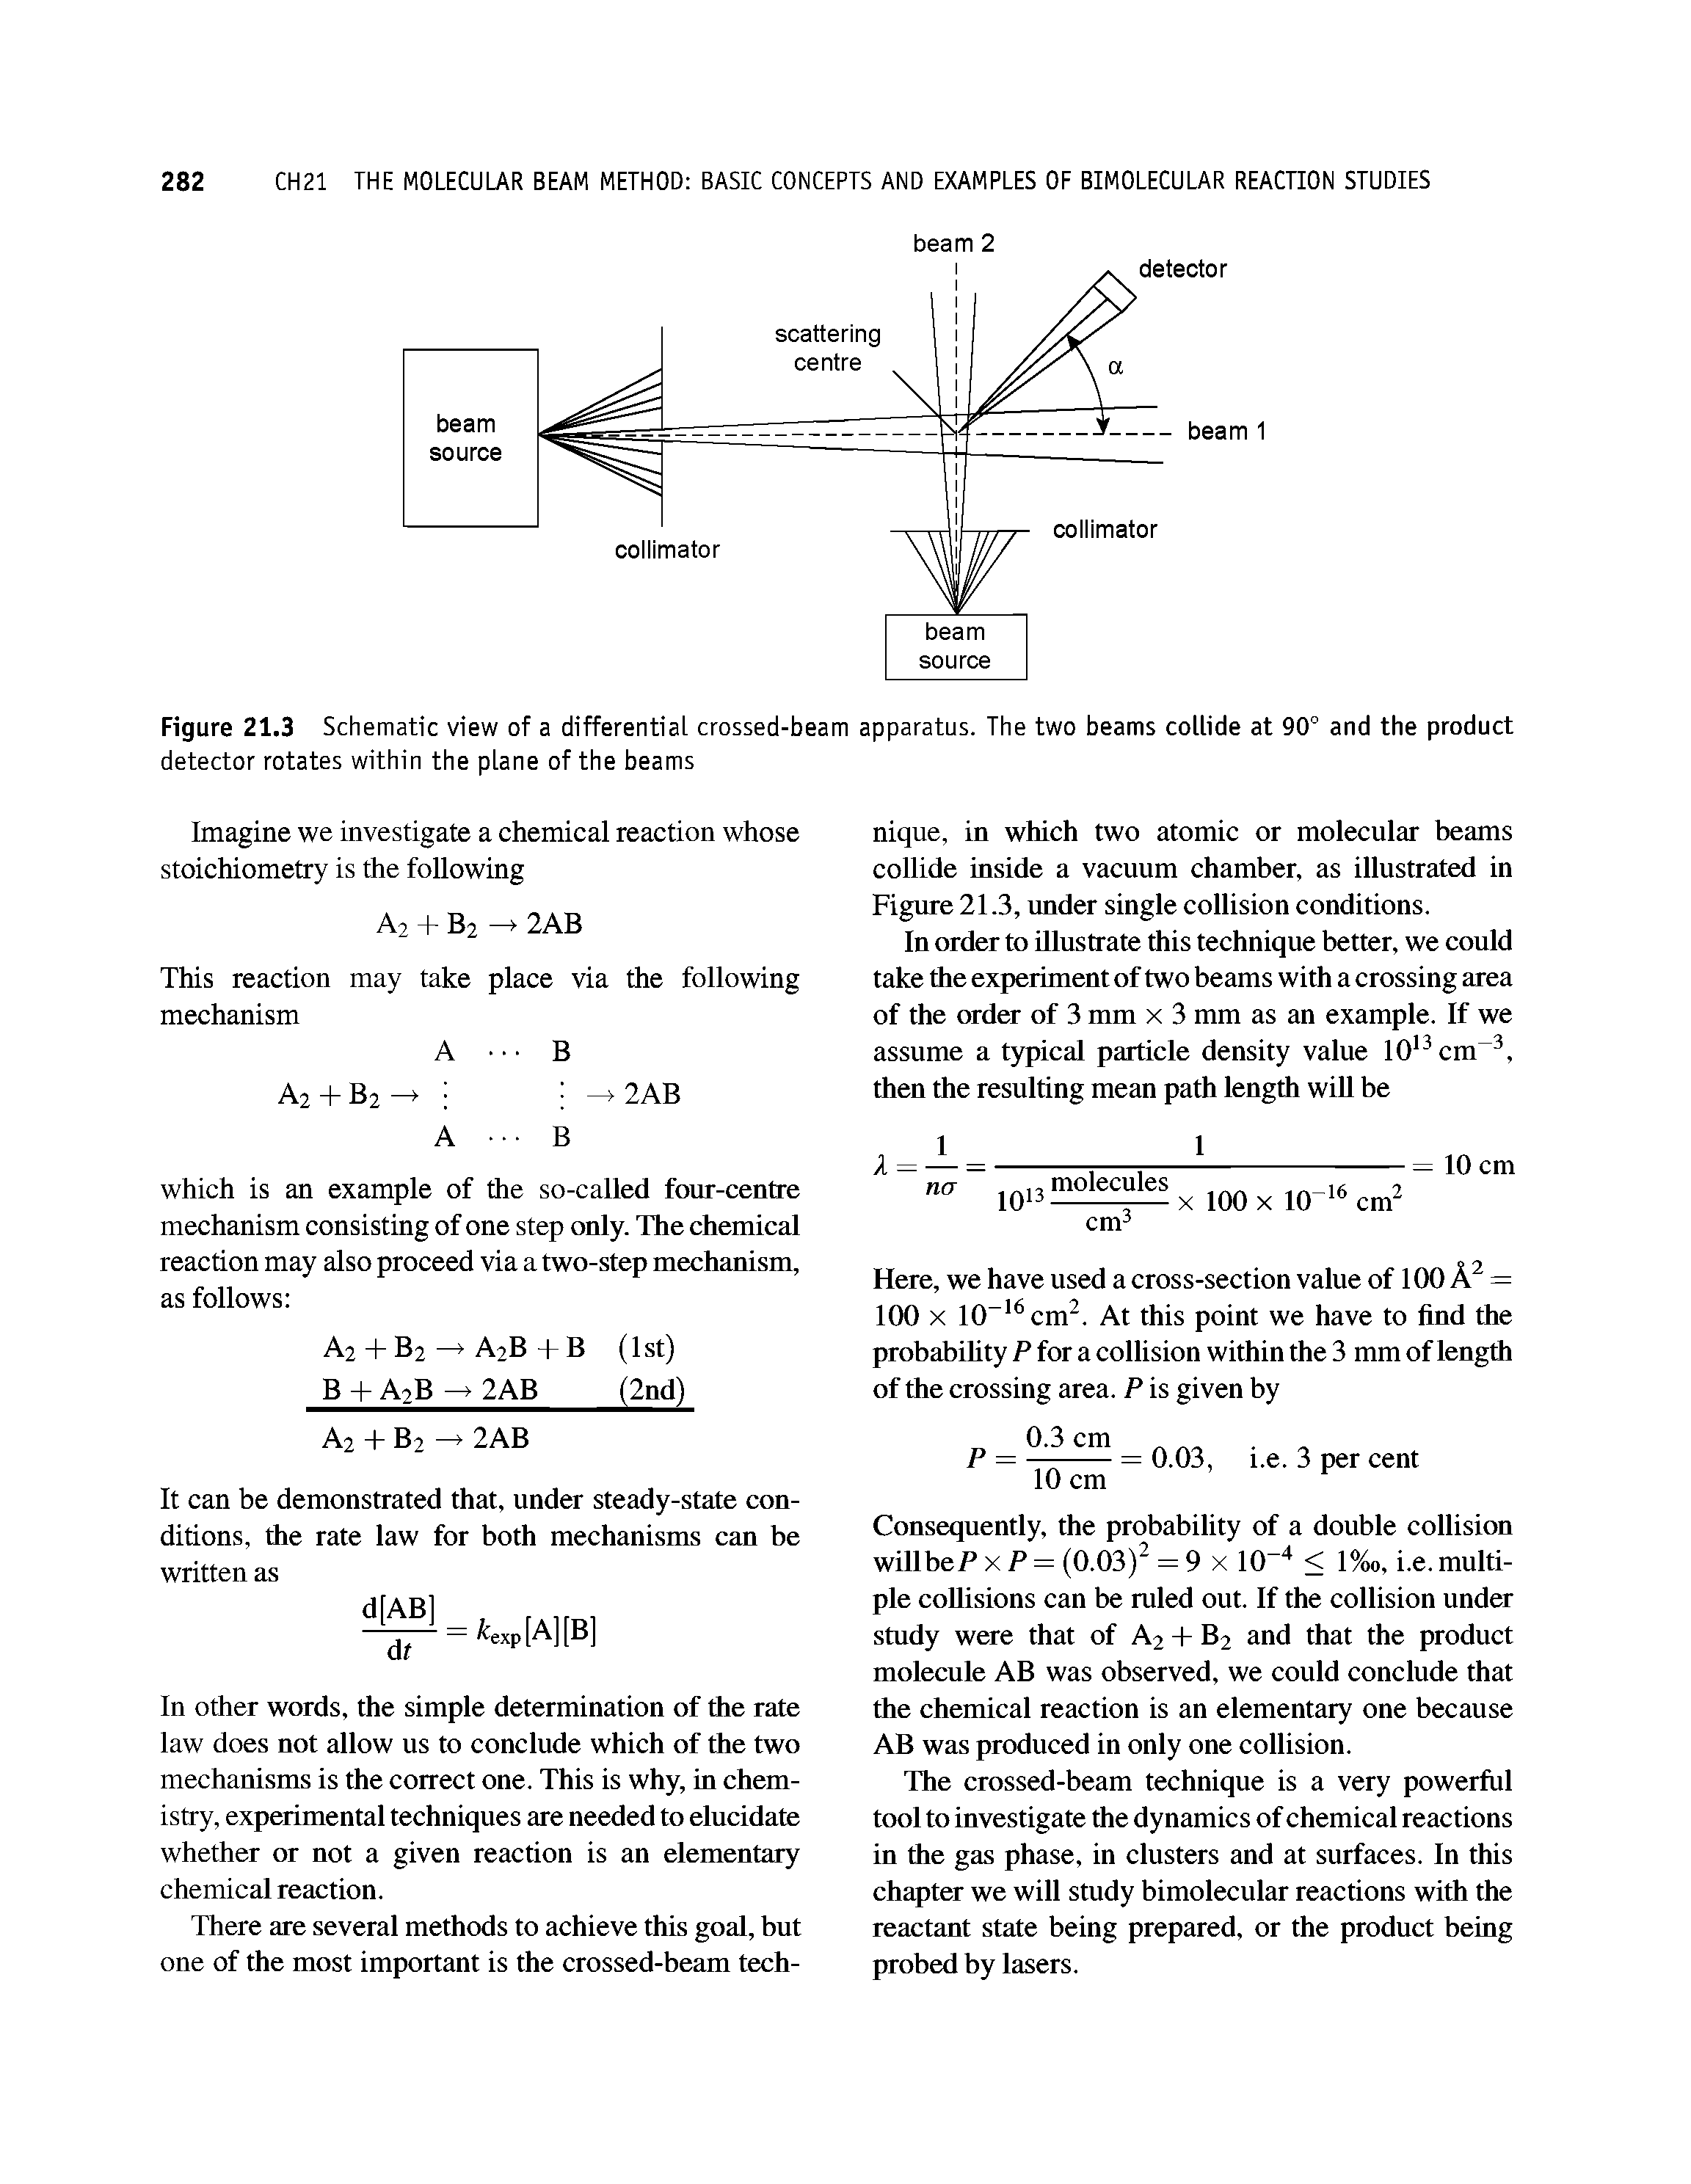 Figure 21,3 Schematic view of a differential crossed-beam apparatus. The two beams collide at 90° and the product detector rotates within the plane of the beams...